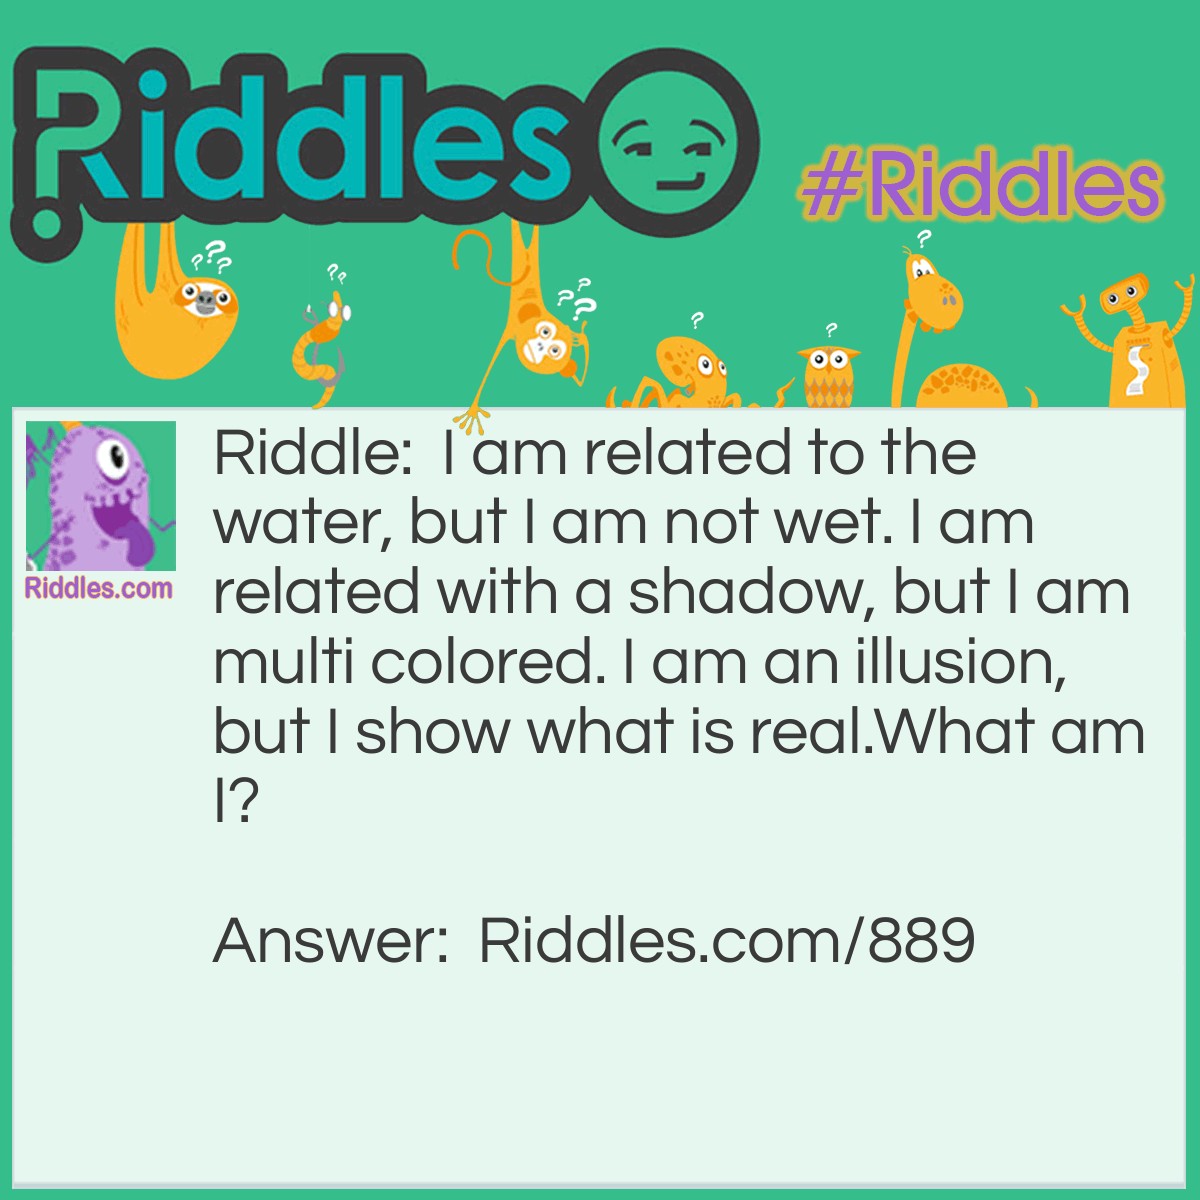 Riddle: I am related to the water, but I am not wet. I am related to a shadow, but I am multi-colored. I am an illusion, but I show what is real.
What am I? Answer: A mirror!